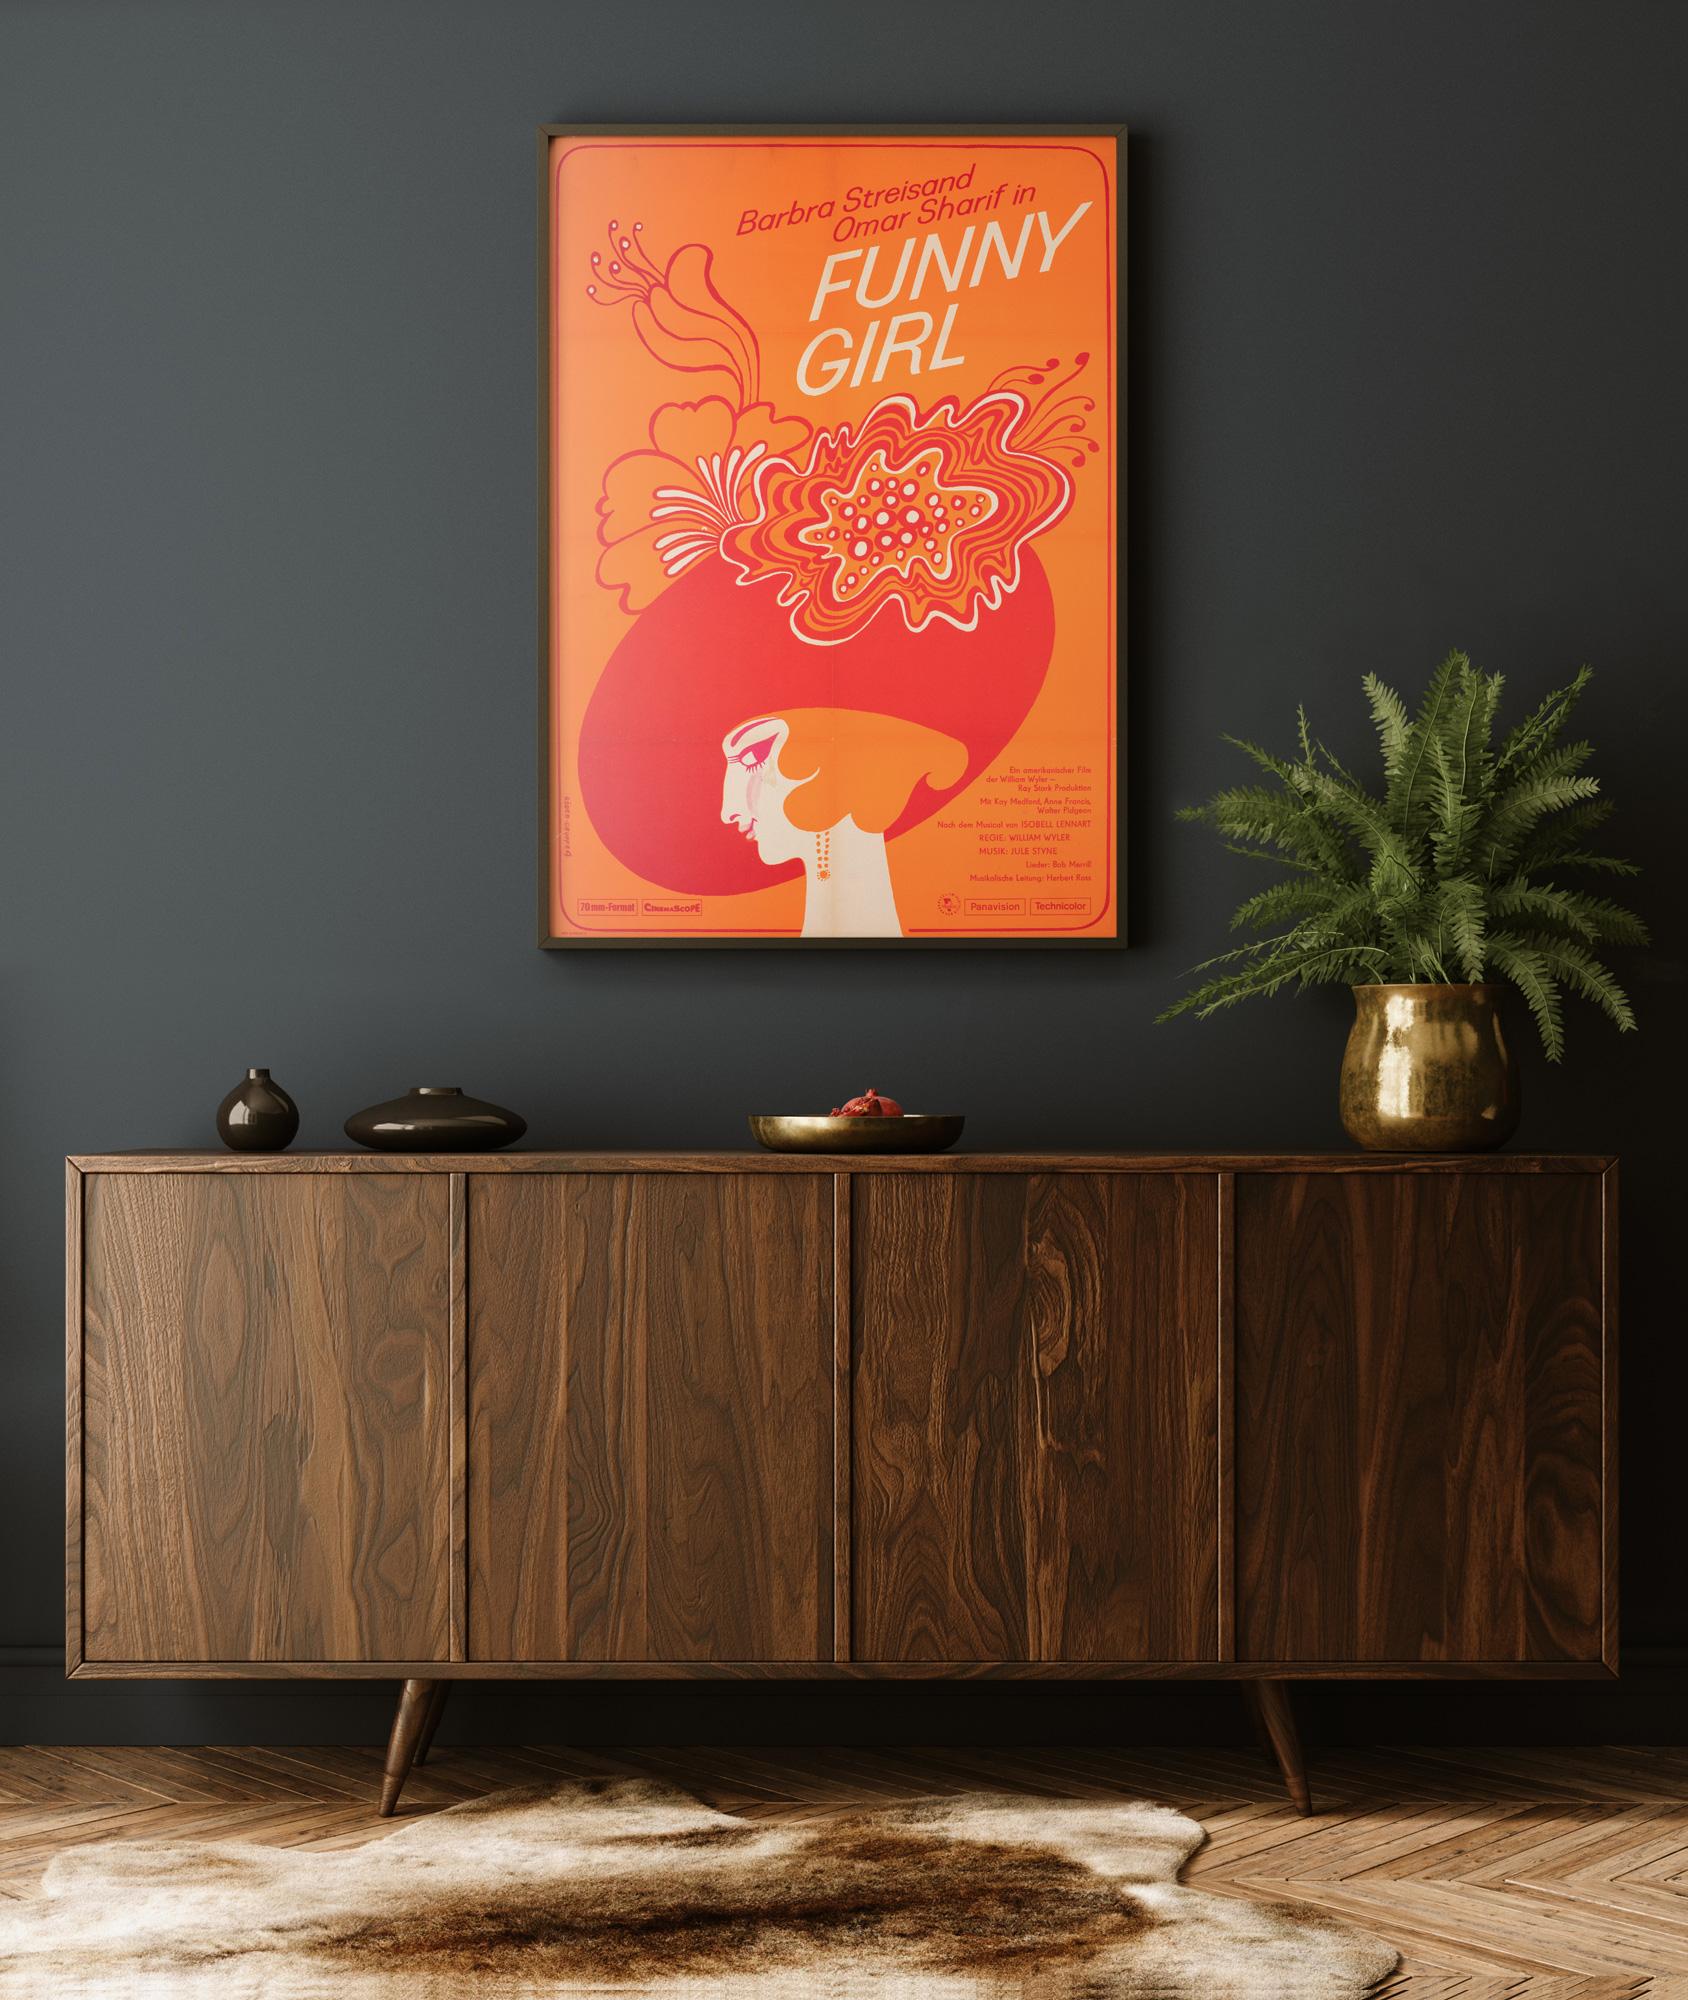 Charming design by Roeder features on this original East German film poster for Funny Girl starring Barbra Streisand and Omar Sharif.

This vintage movie poster is sized 22 3/4 x 32 inches and will be sent rolled (unframe).